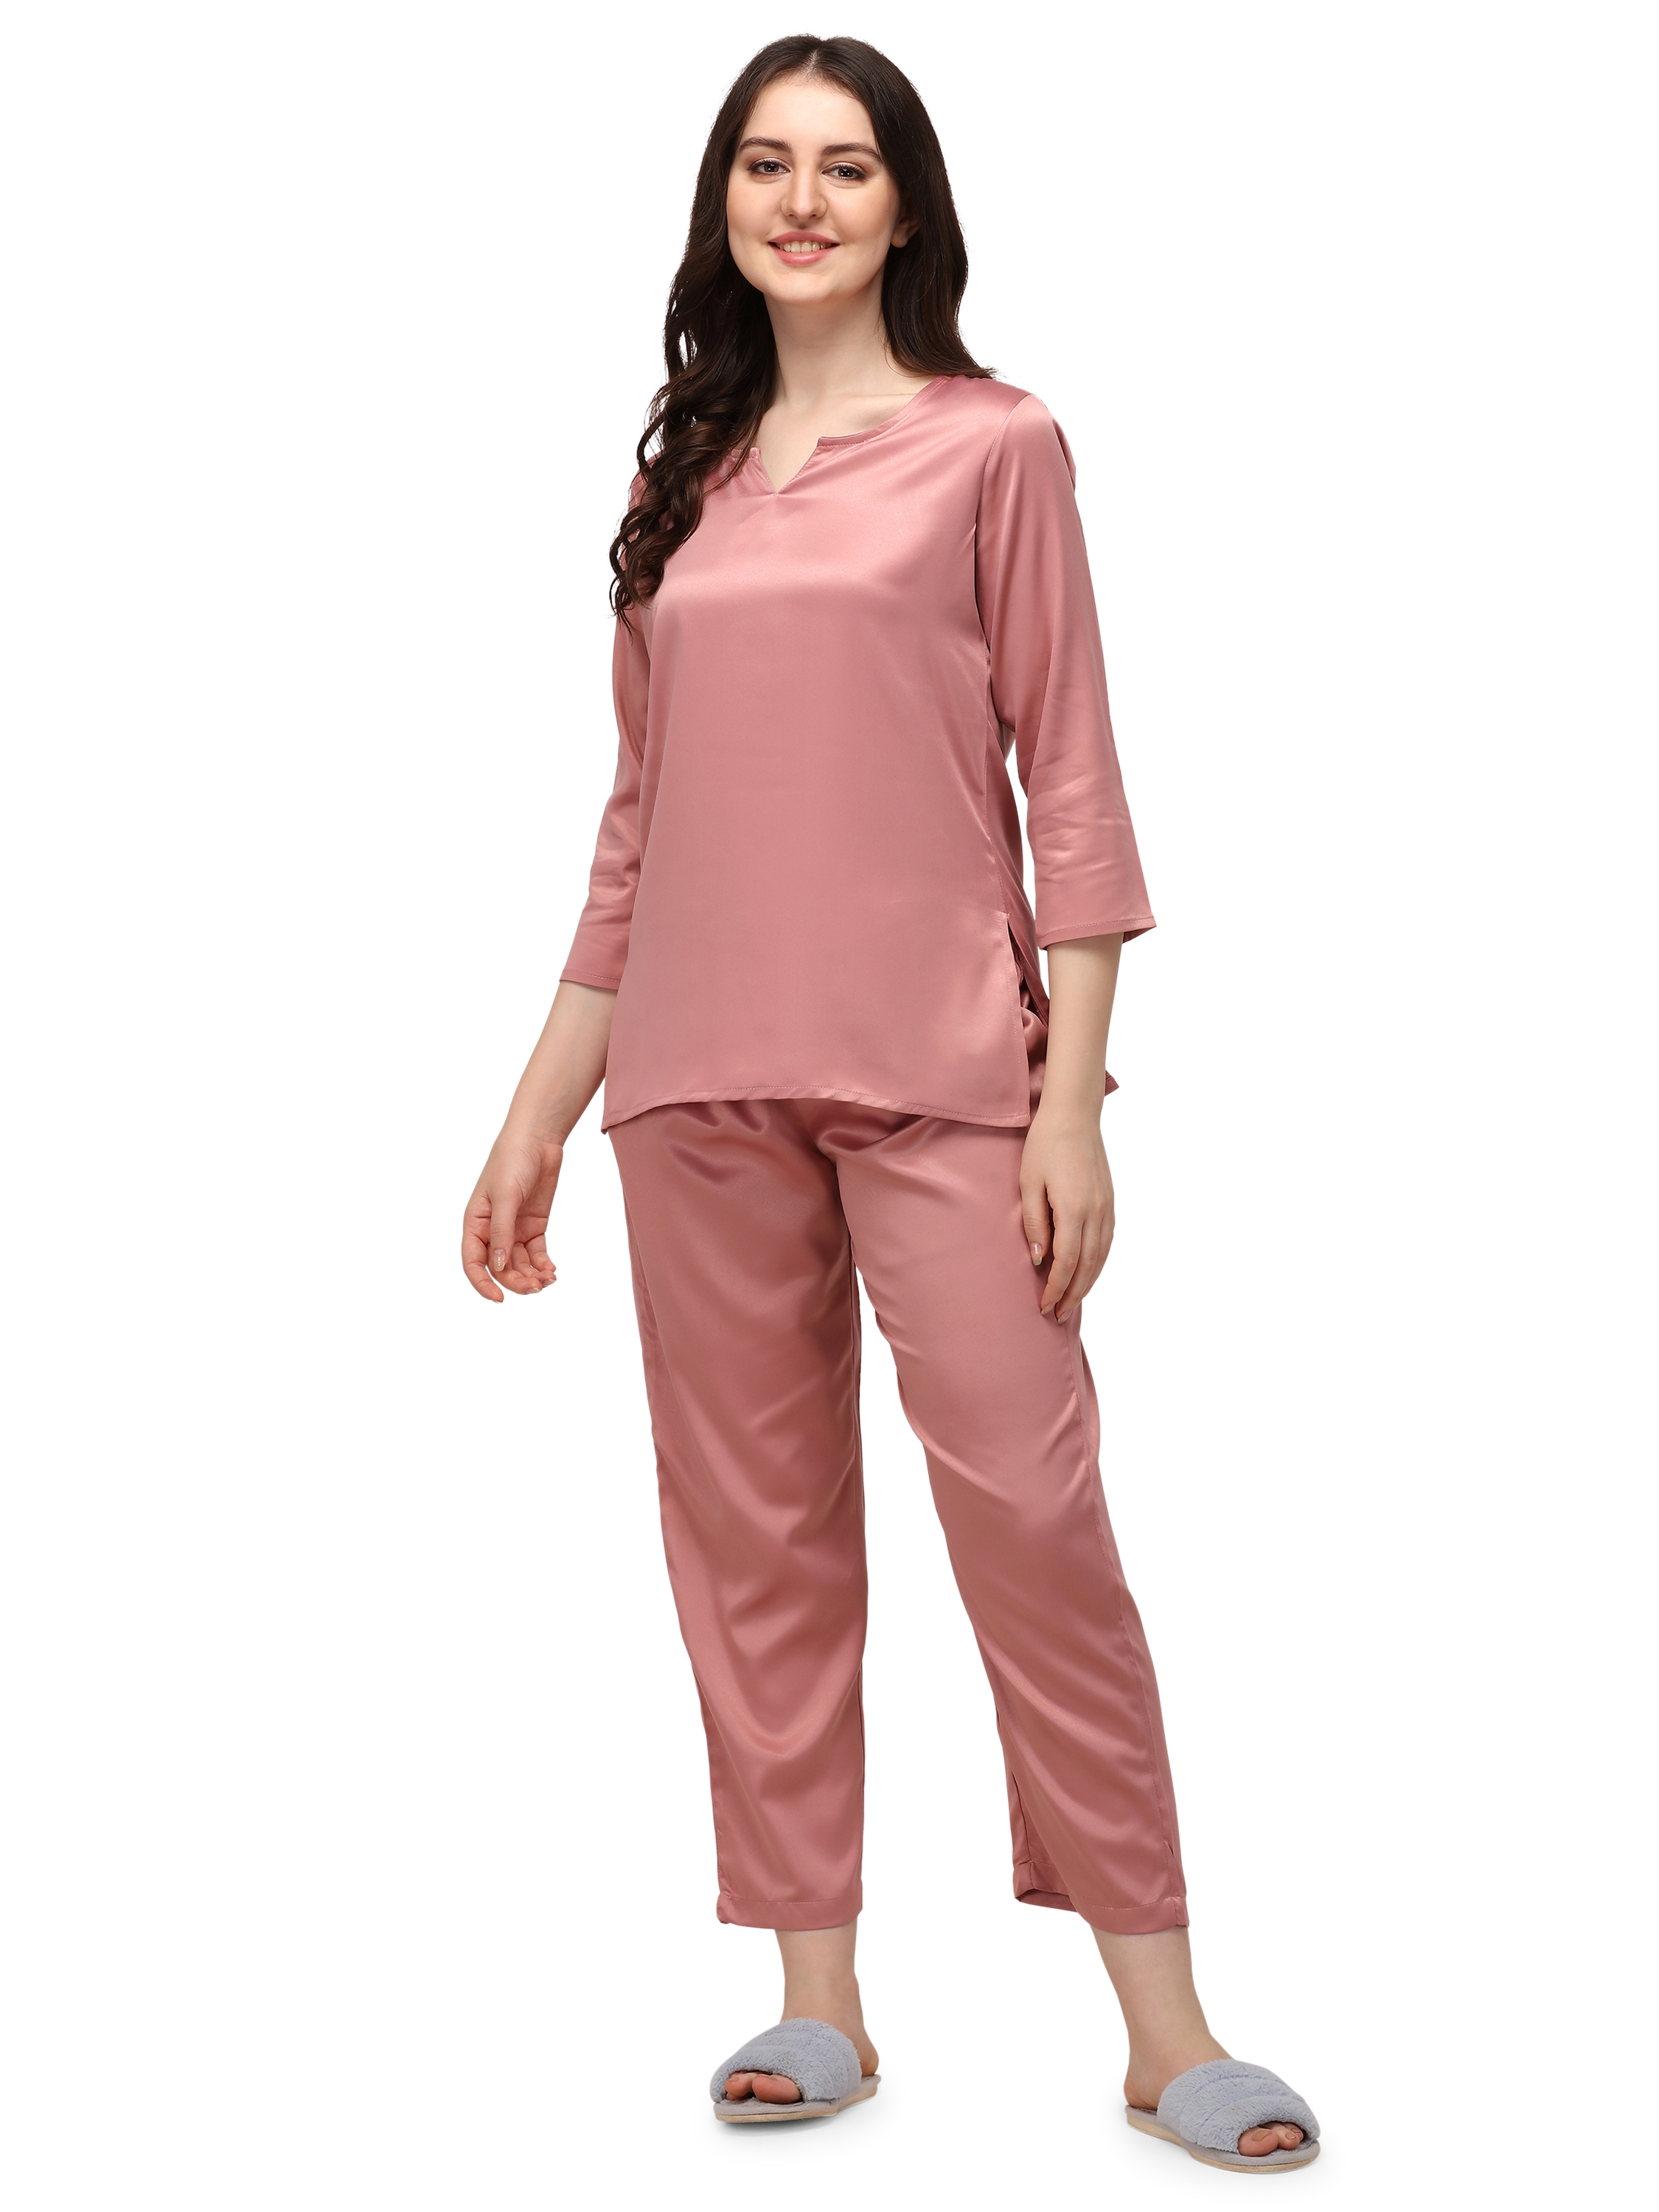 Smarty Pants | Smarty Pants Women's Silk Satin Rose Gold Color Night Suit Pair